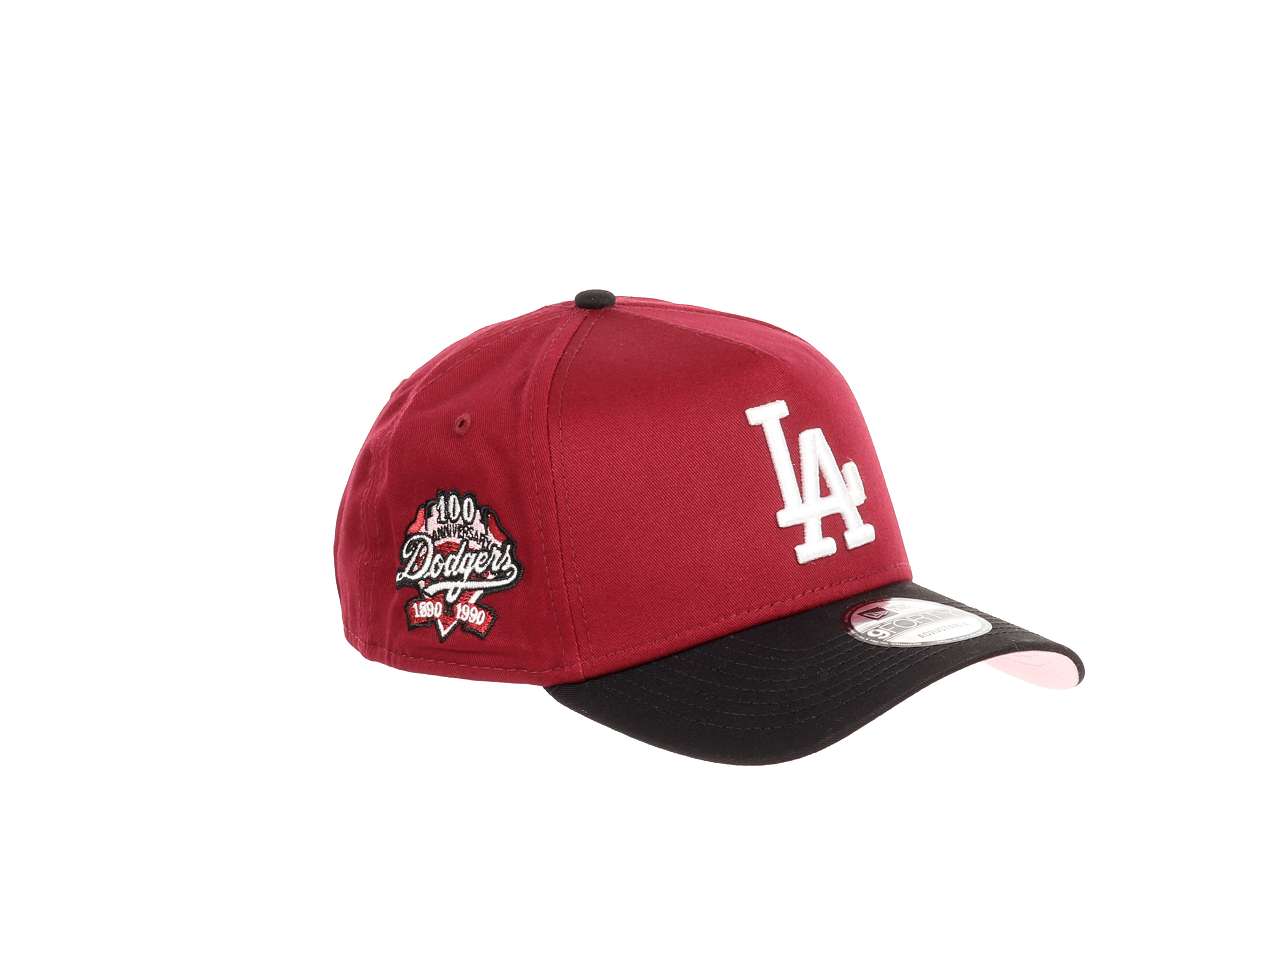 Los Angeles Dodgers MLB 100th Anniversary Sidepatch Cardinal Red Black 9Forty A-Frame Snapback Cap New Era